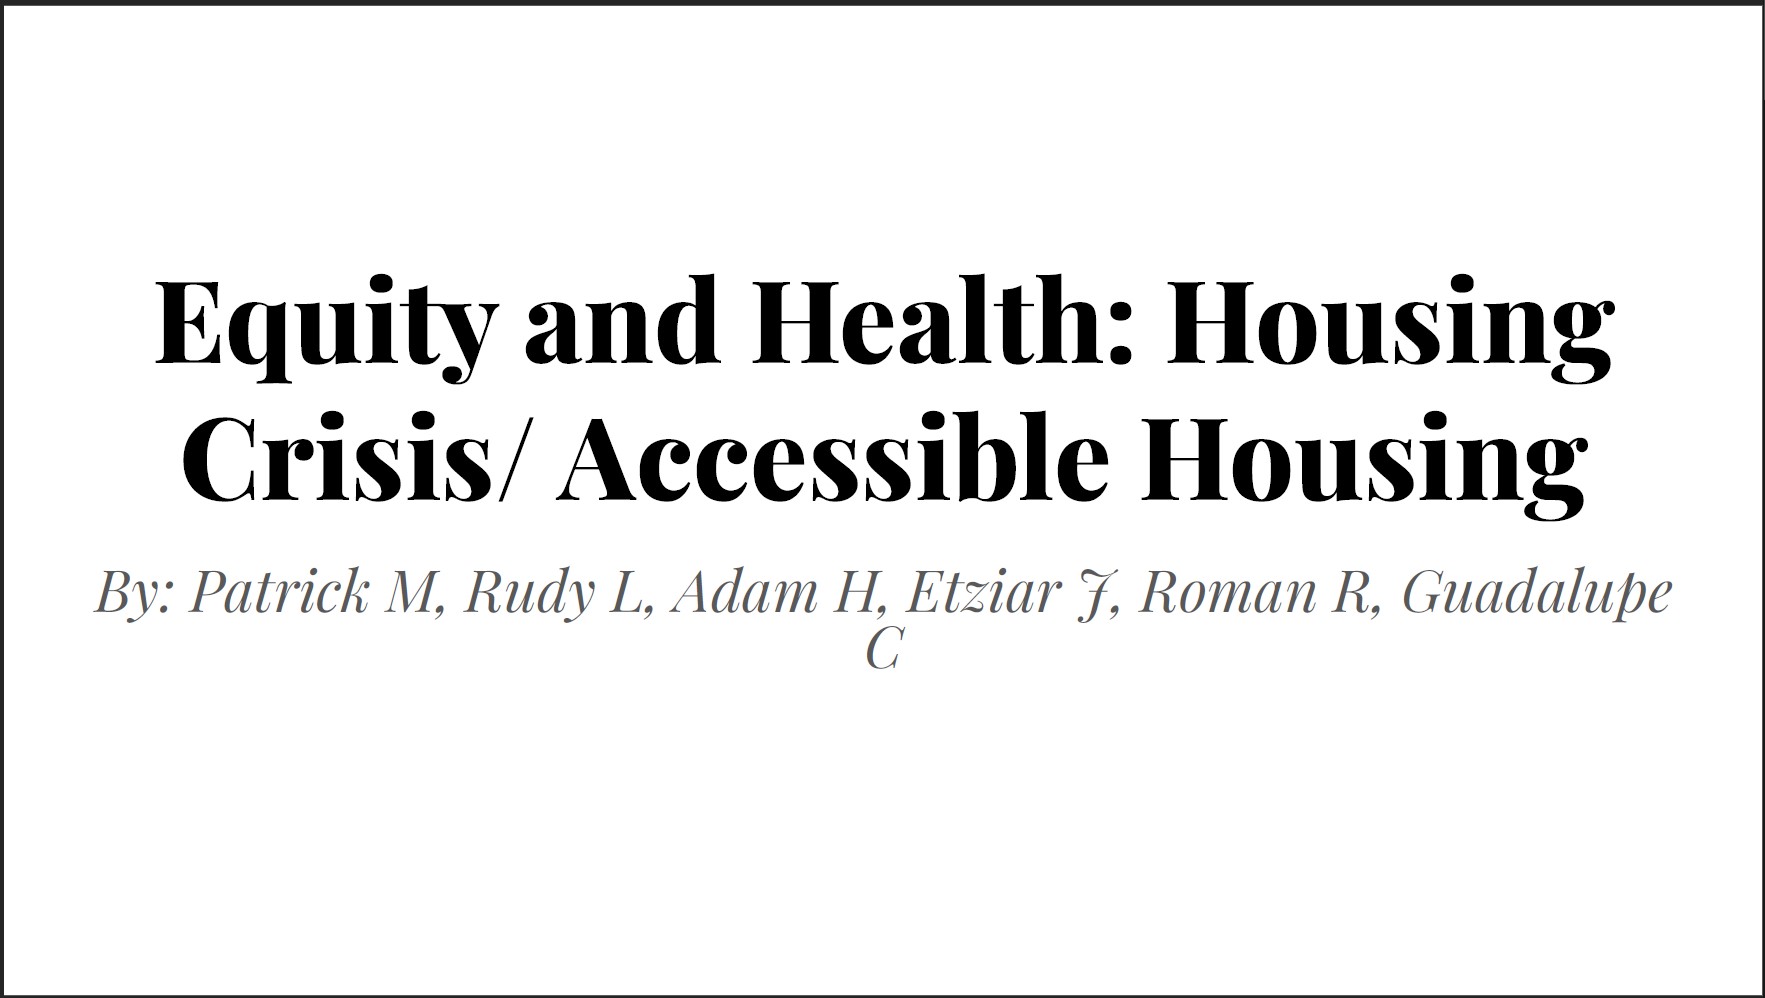 Equity and Health: Housing Crisis/ Accessible Housing